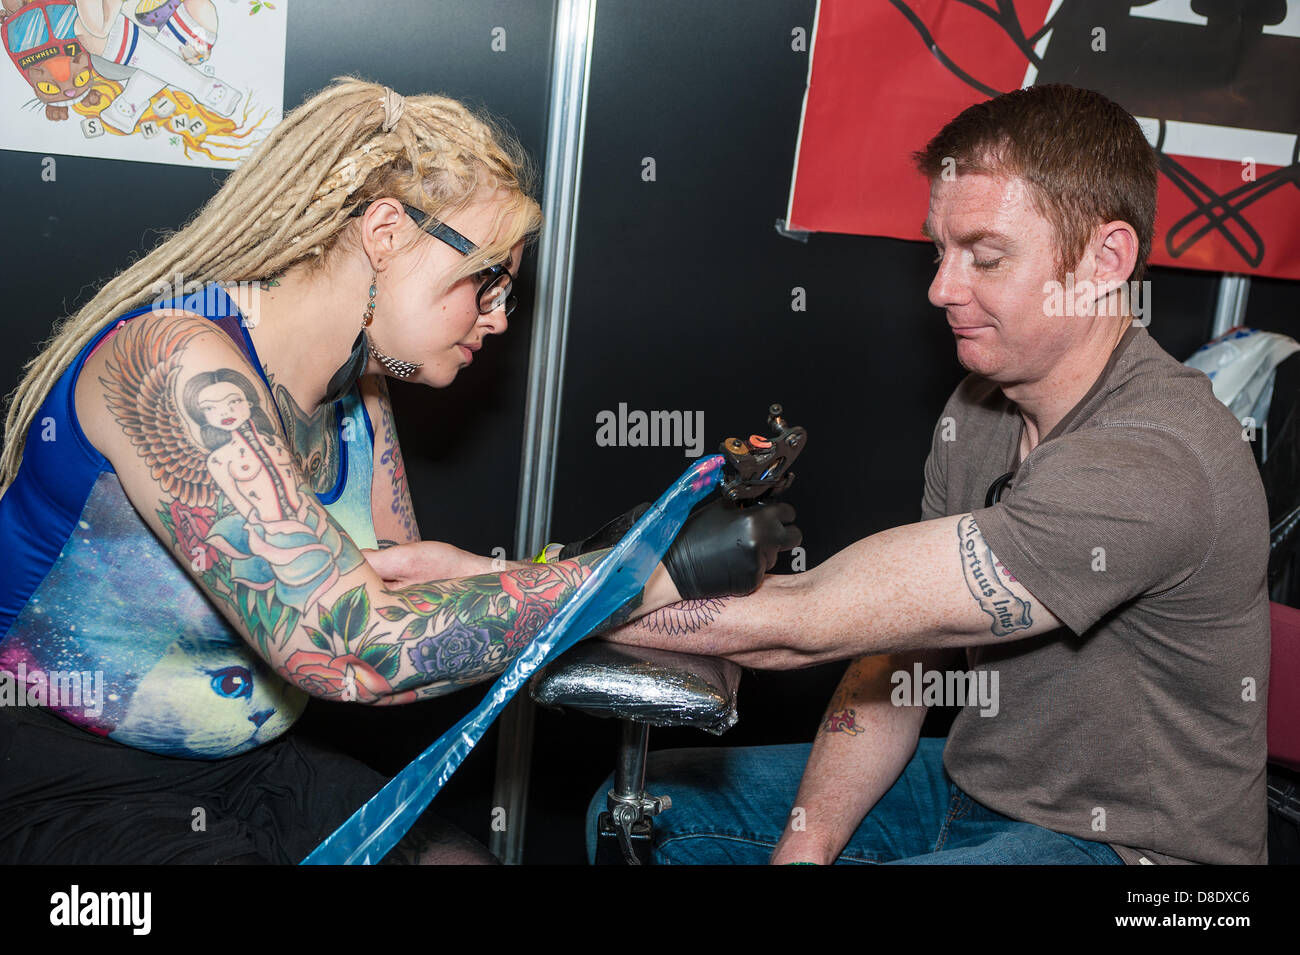 London, UK, 26th May 2013. Tattoo artist Ally Cat, 28 from Purley, Croydon works on a tattoo for Steve Dowling, 38, a food market worker from Henley-on-Thames Credit: Terence Mendoza/Alamy Live News Stock Photo